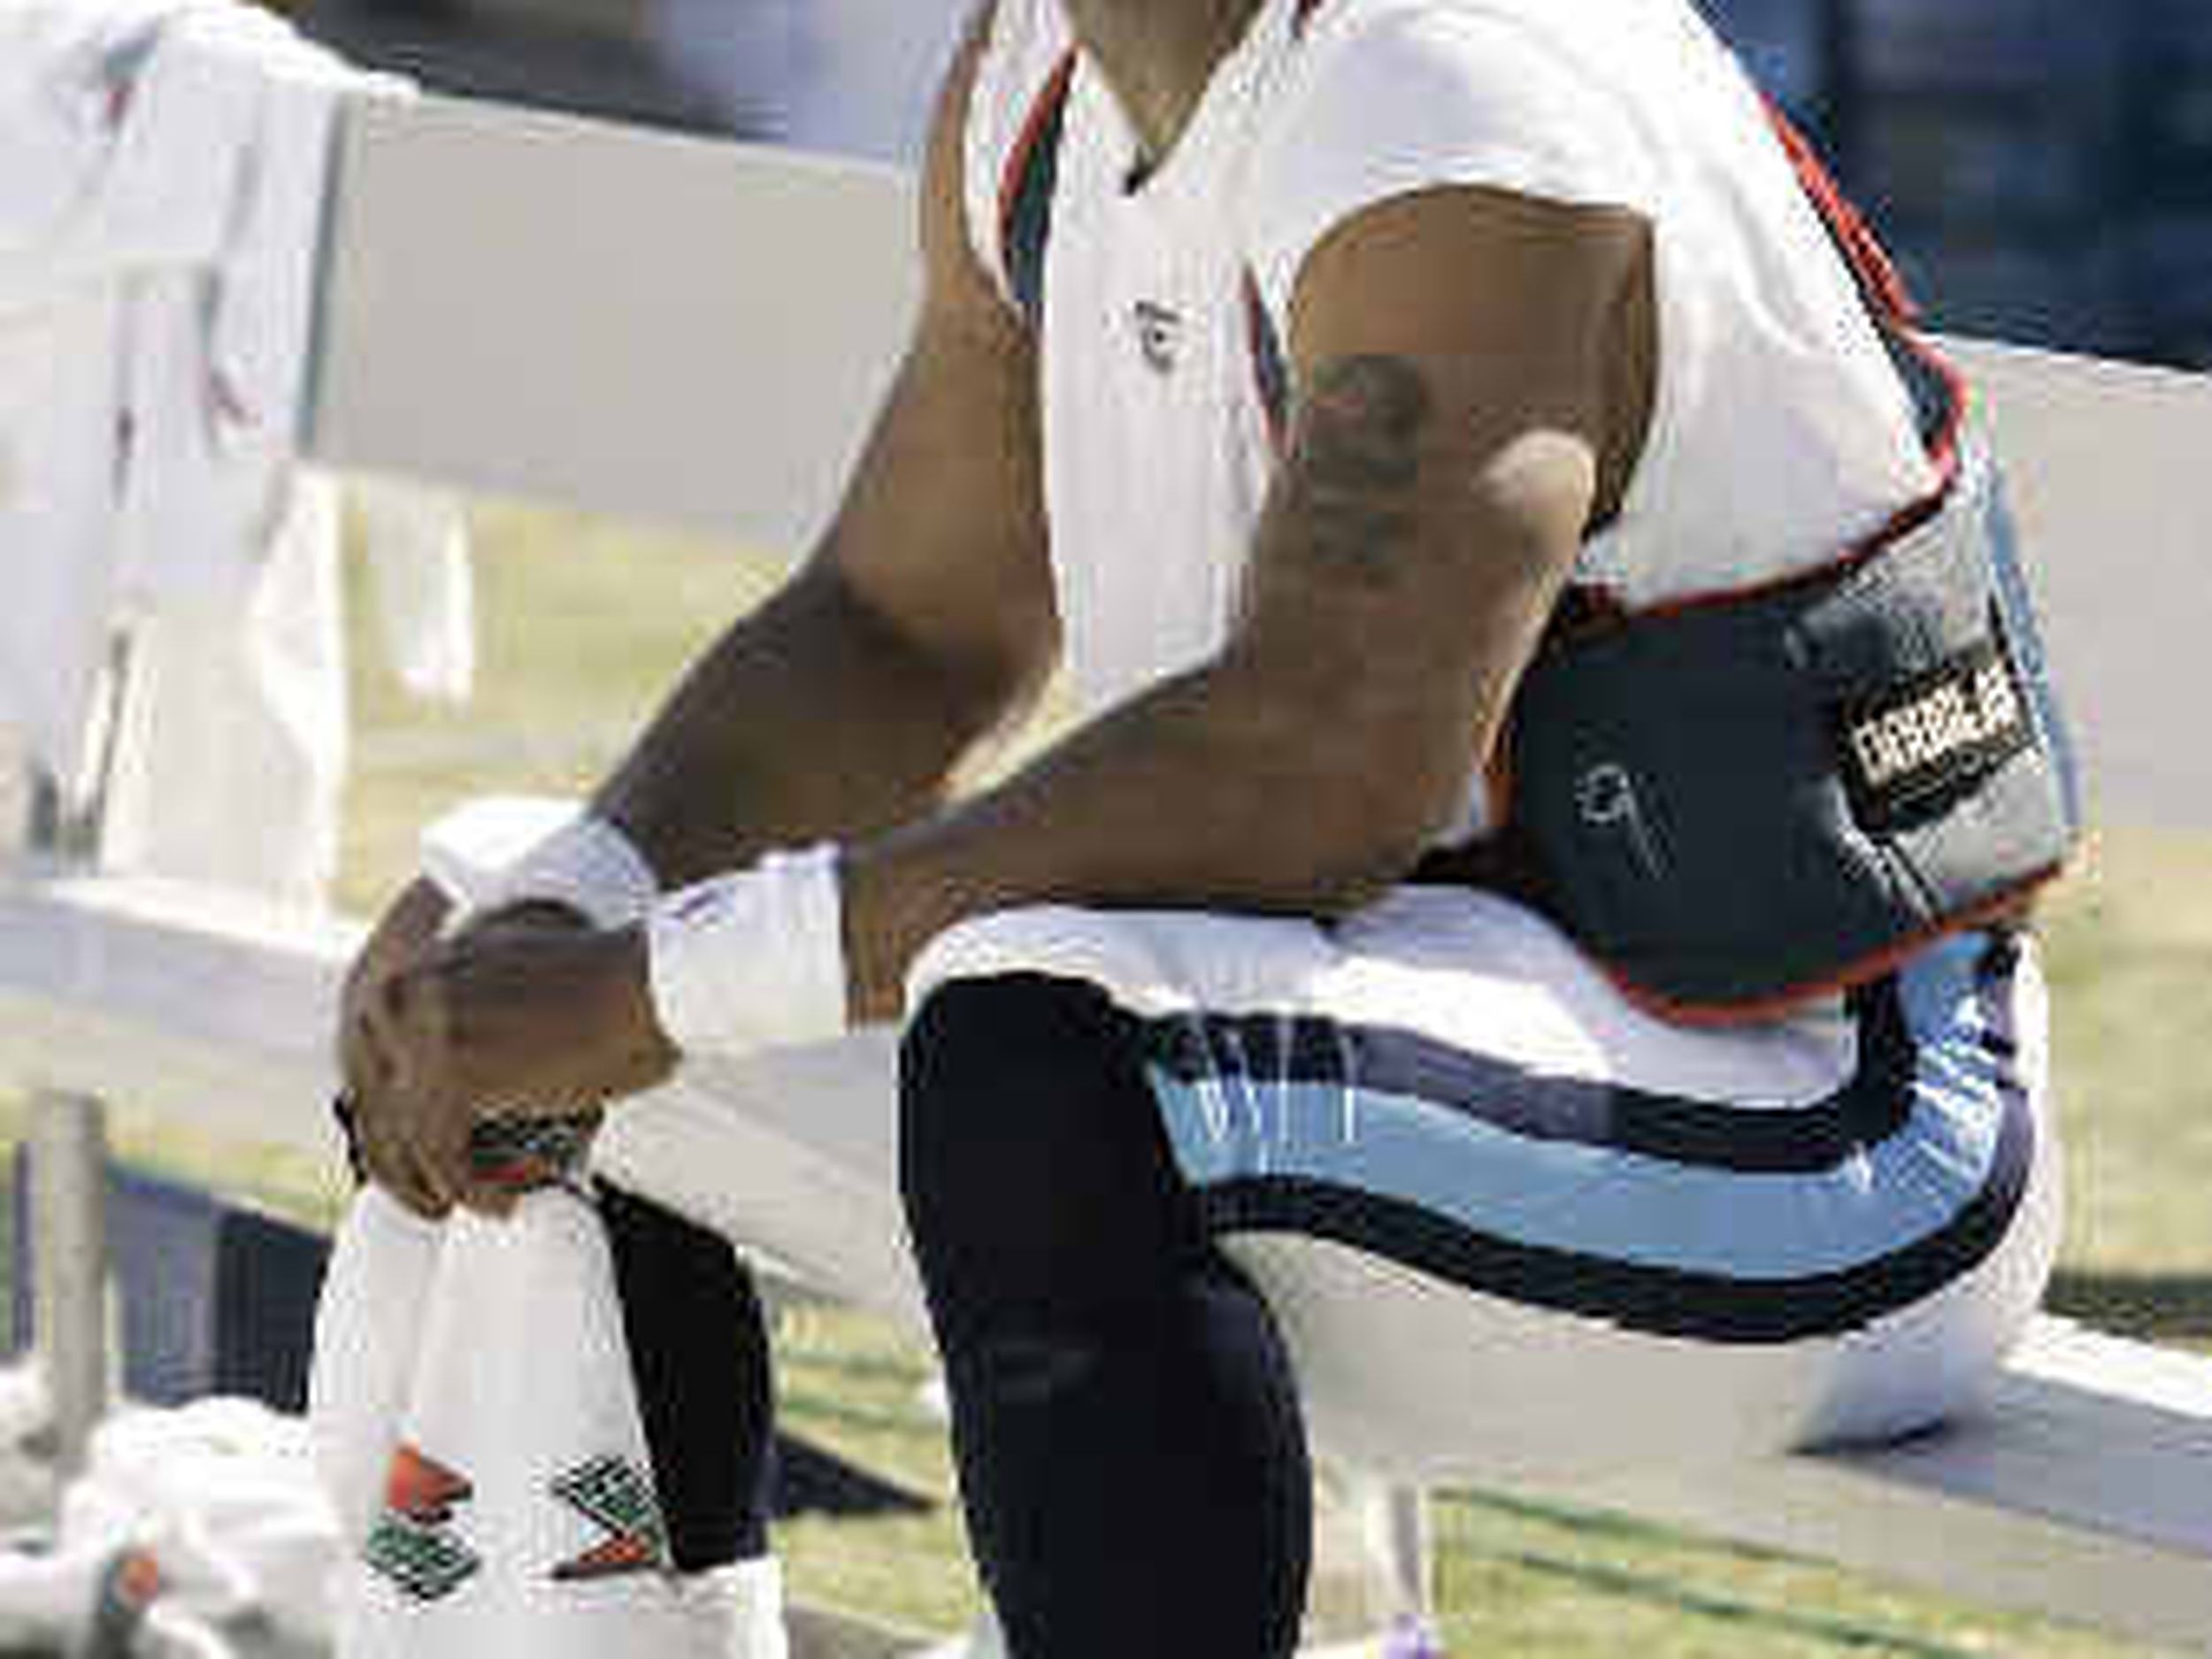 Tennessee Titans to Retire Steve McNair's Number - Southwestern